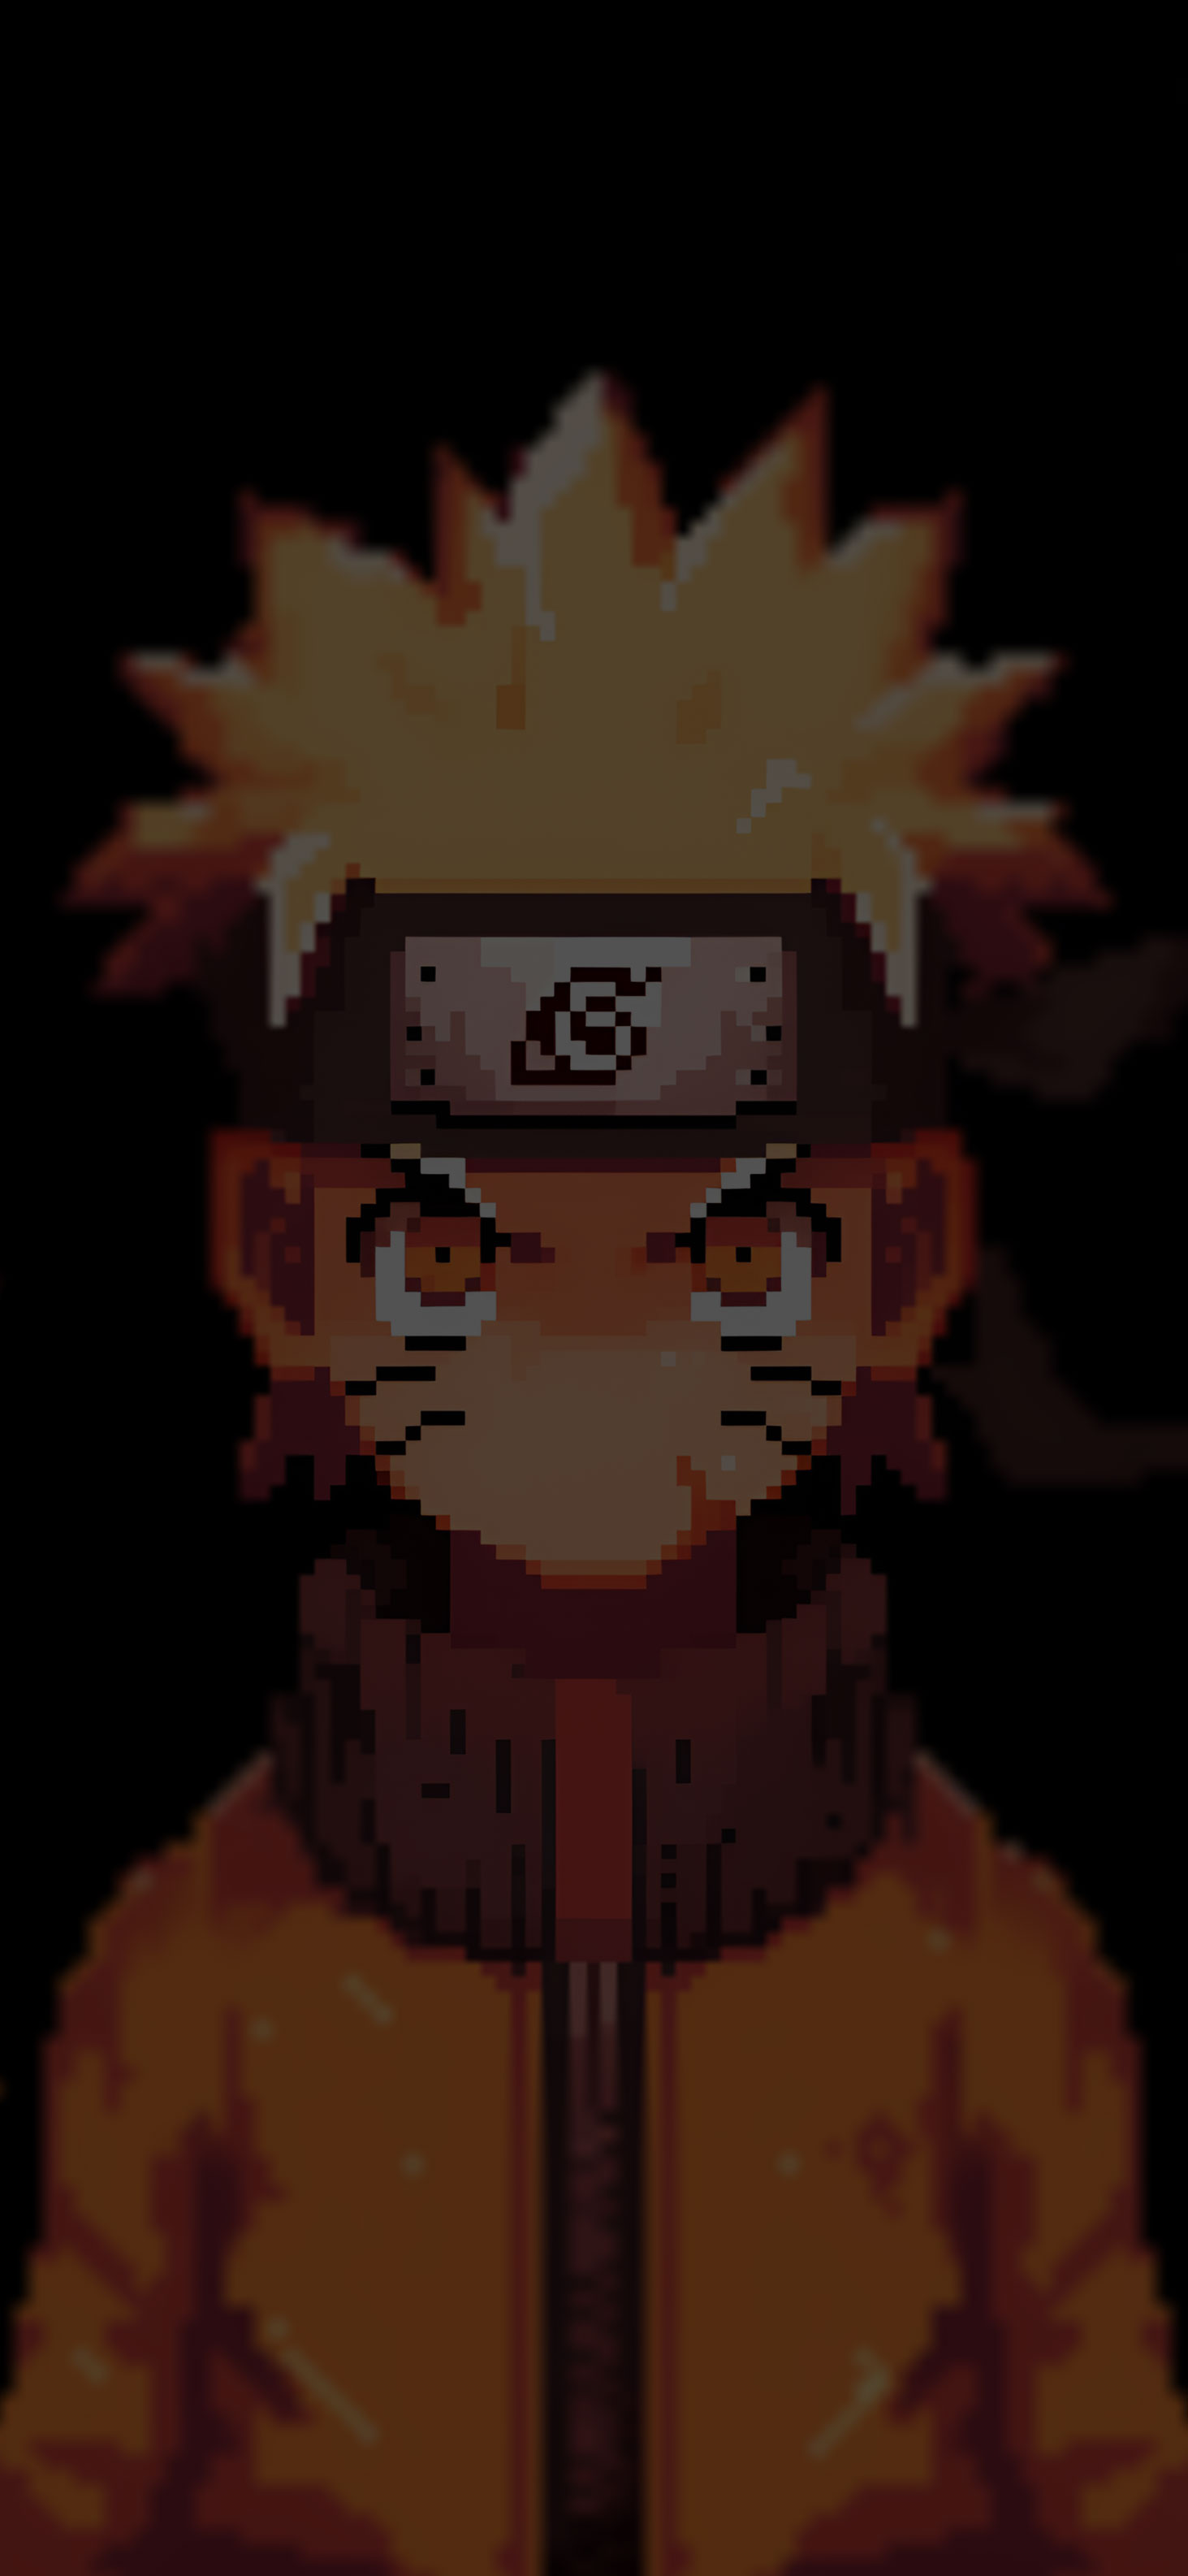 Gloomy Naruto Pixel Wallpapers - Best Anime Wallpapers for iPhone